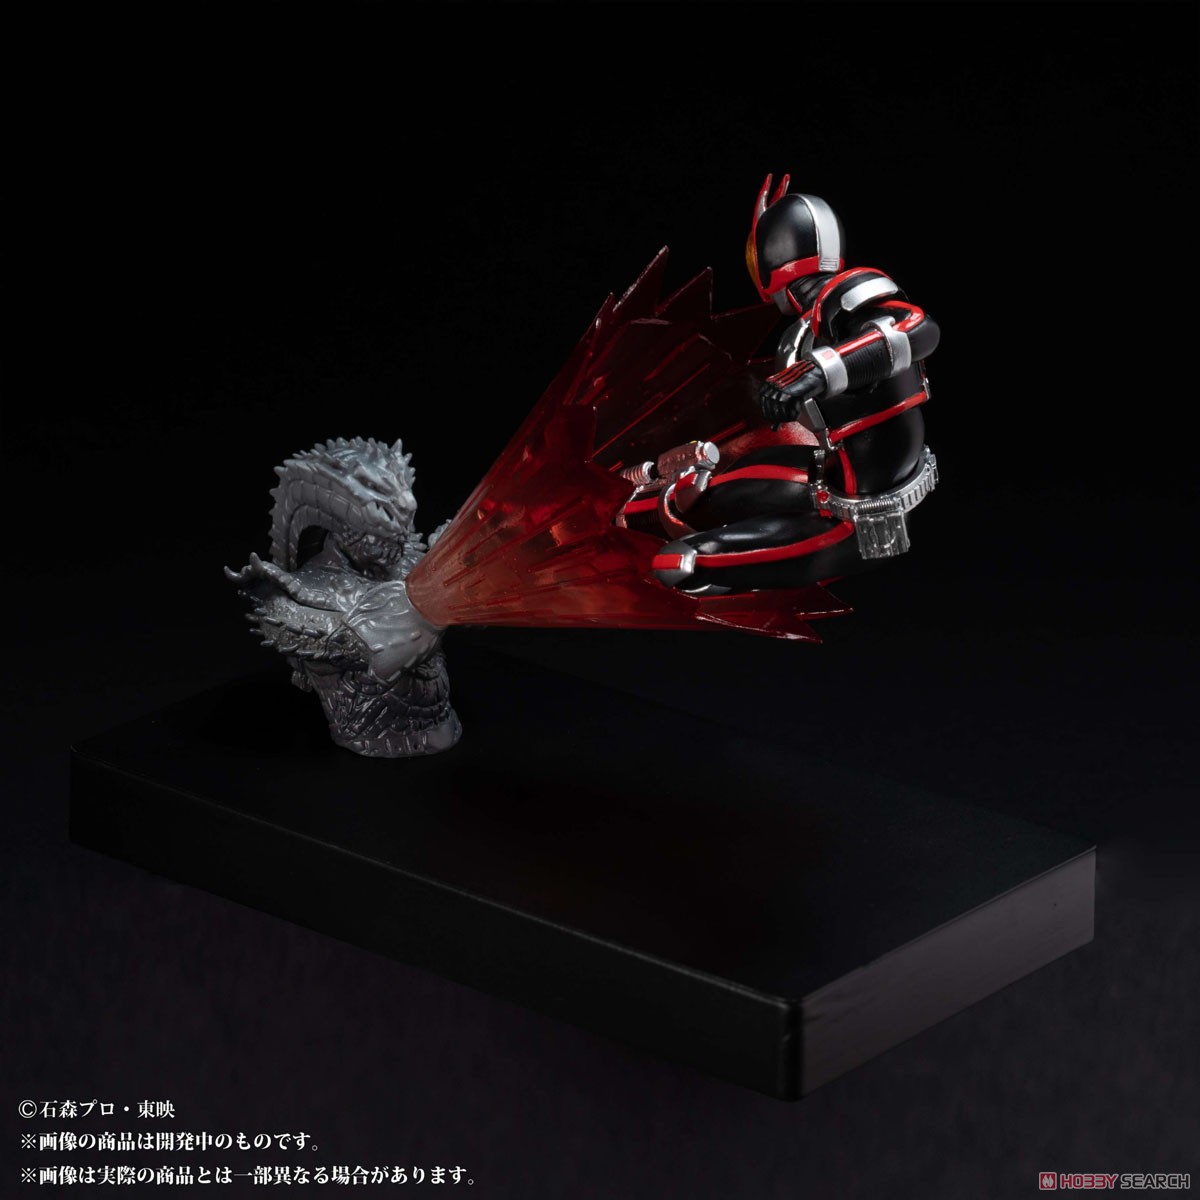 Glow In The Dark『仮面ライダーファイズ』仮面ライダー555 完成品フィギュア-009